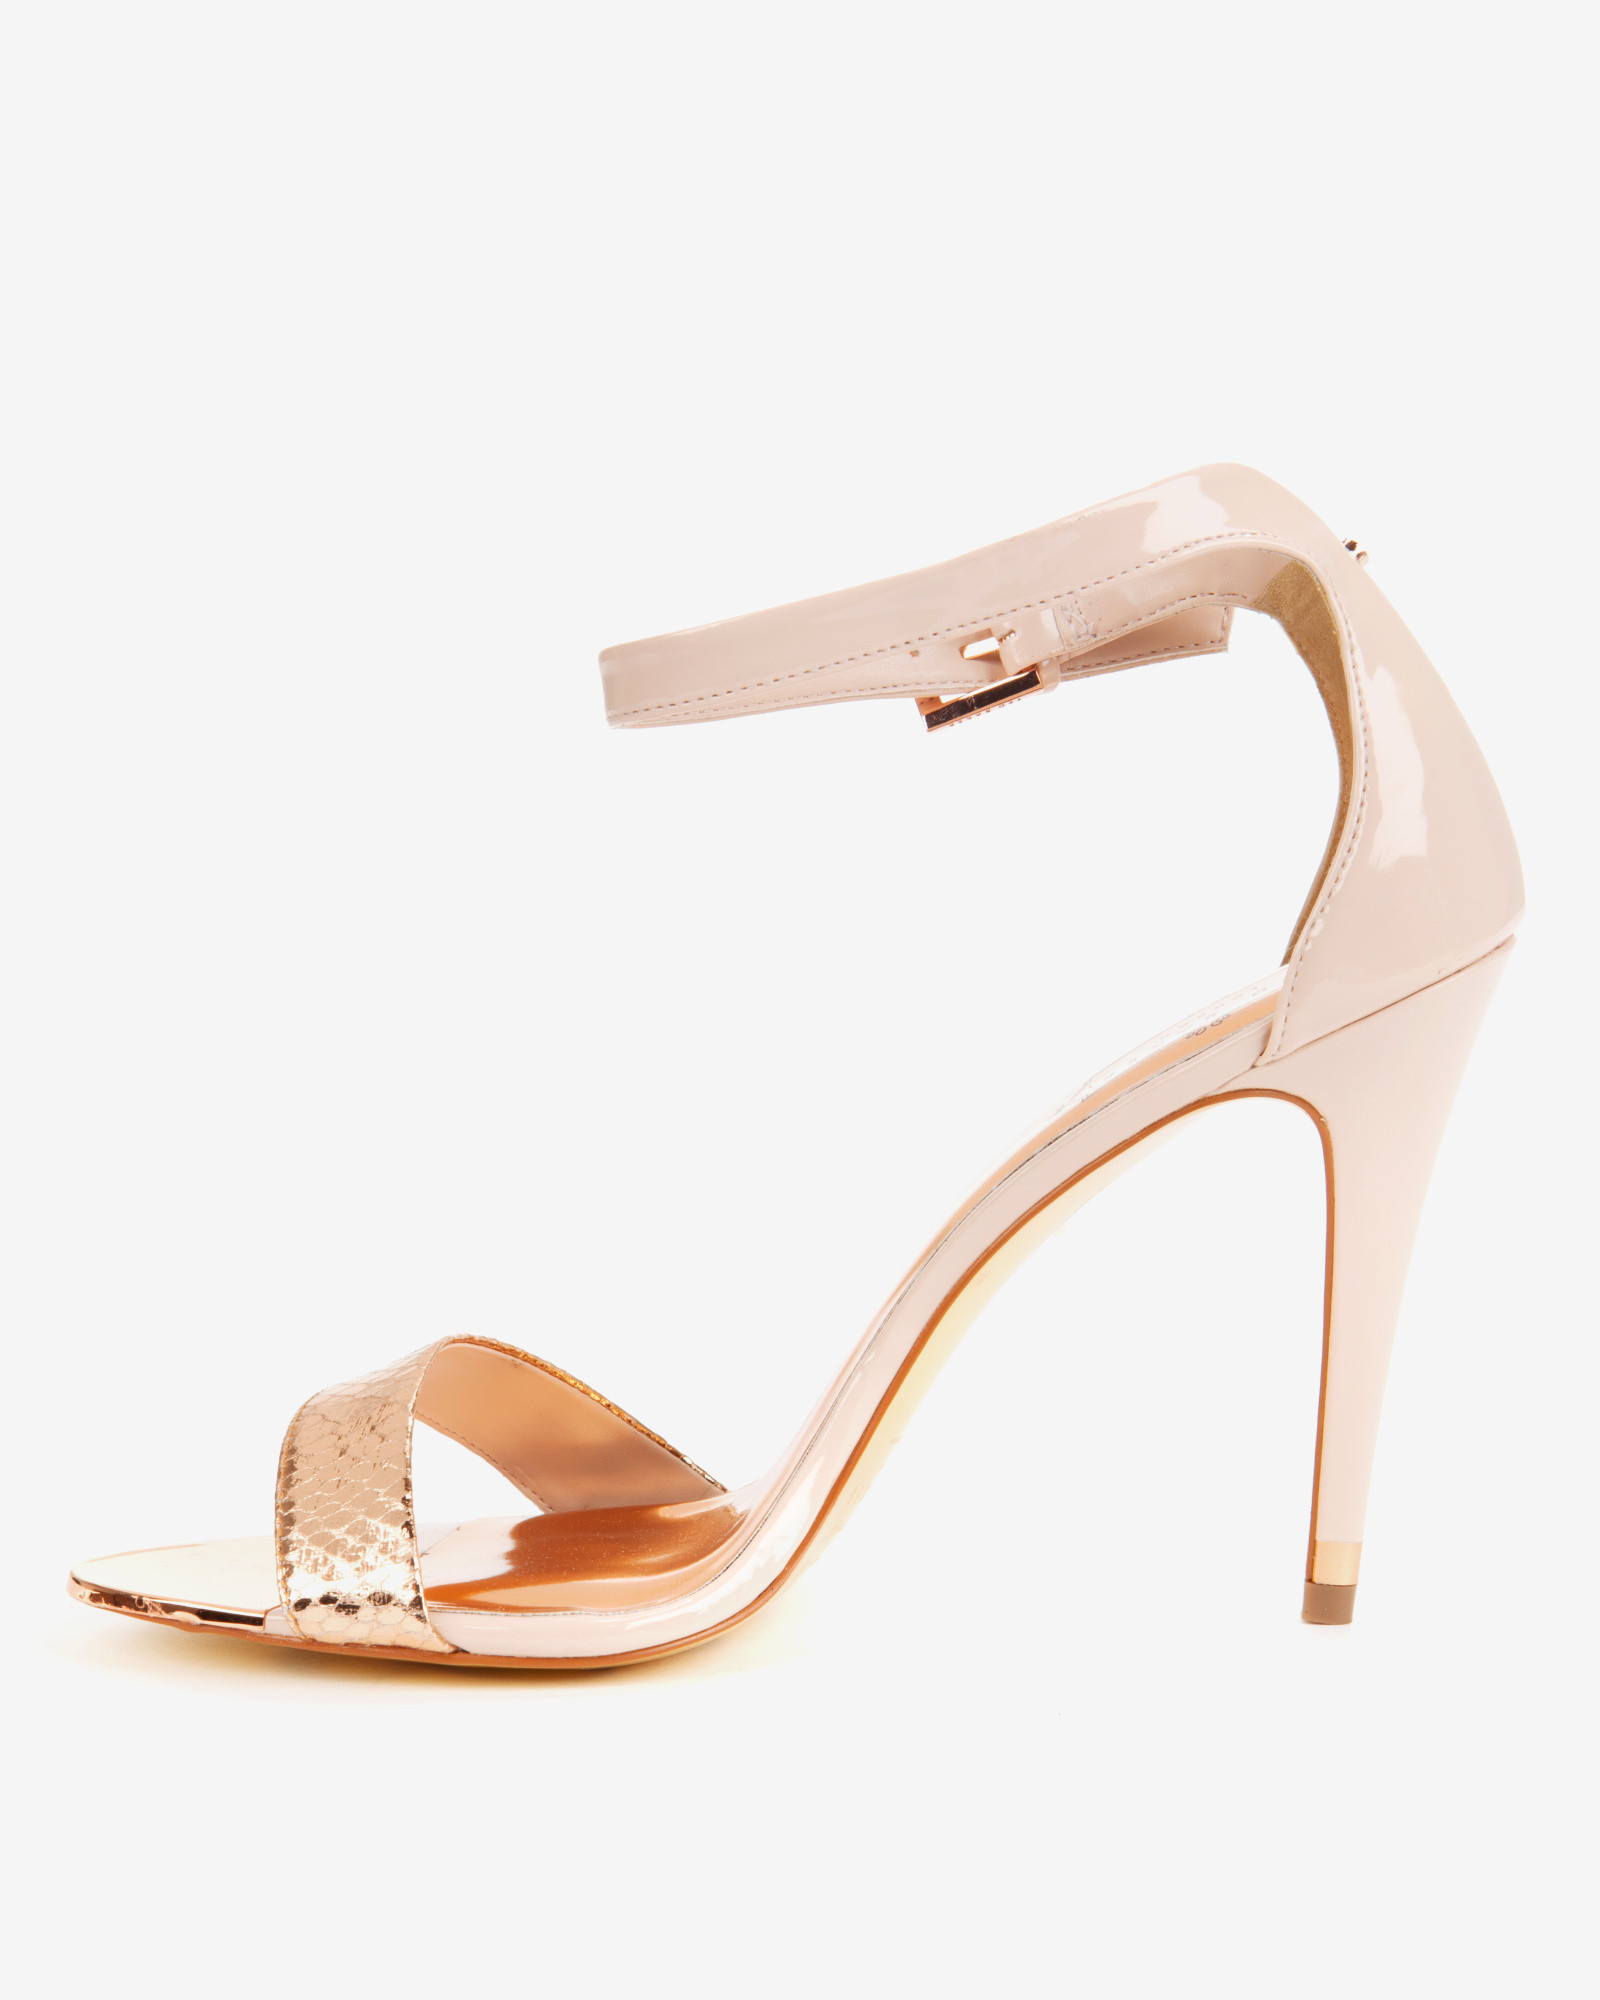 Lyst - Ted Baker Ankle Strap Sandals in Pink